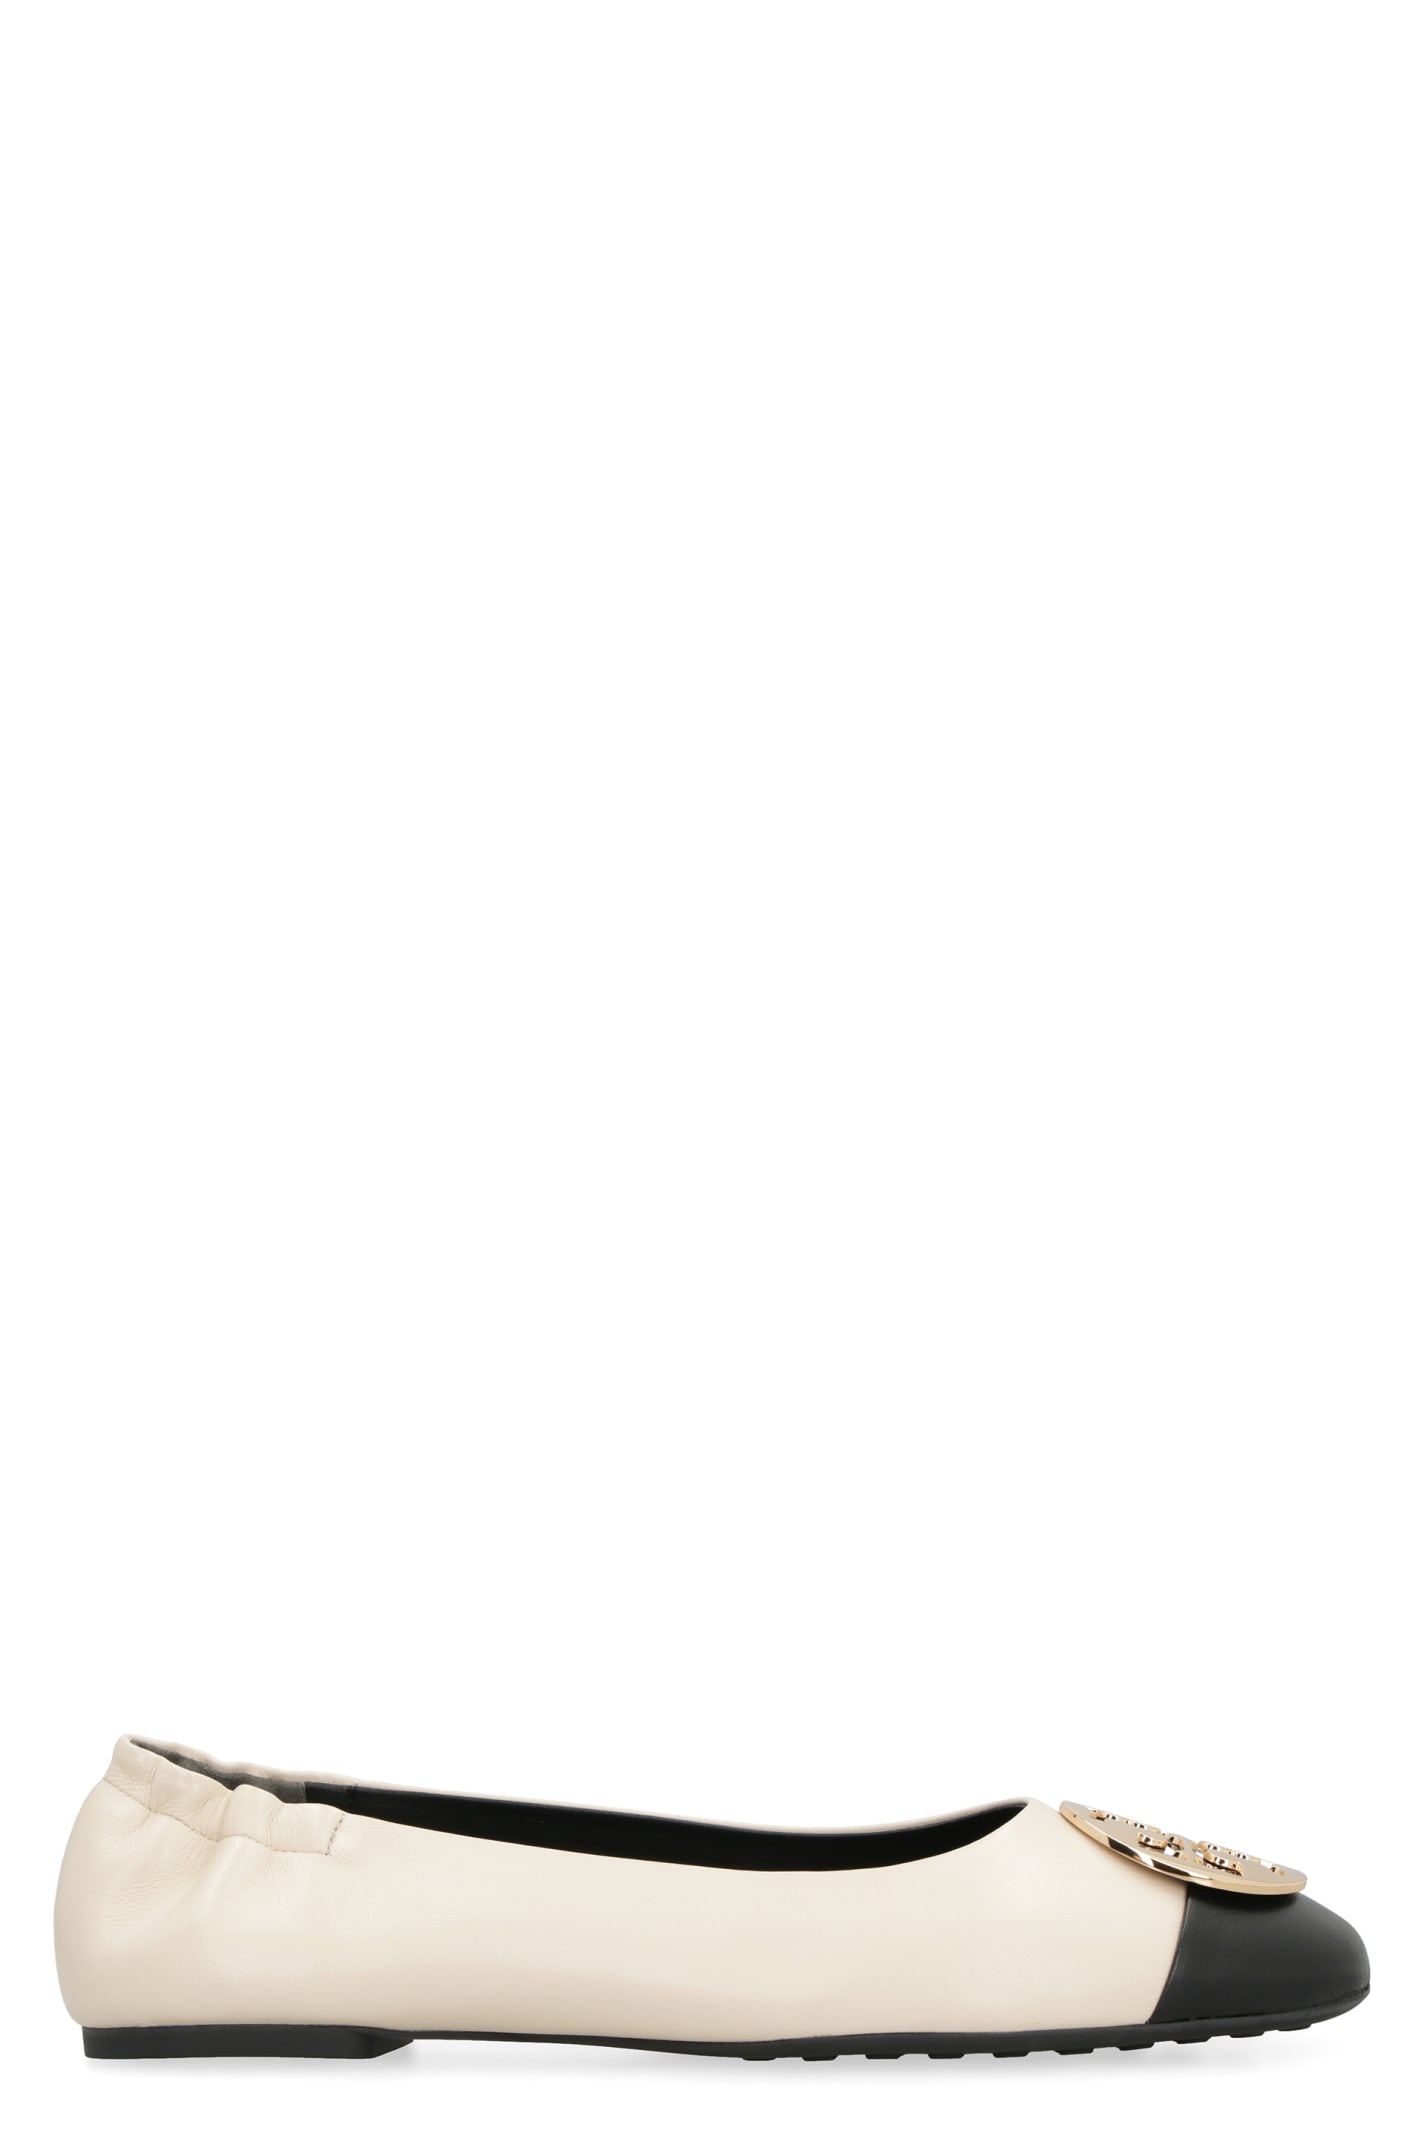 Shop Tory Burch Claire Leather Ballet Flats In Black